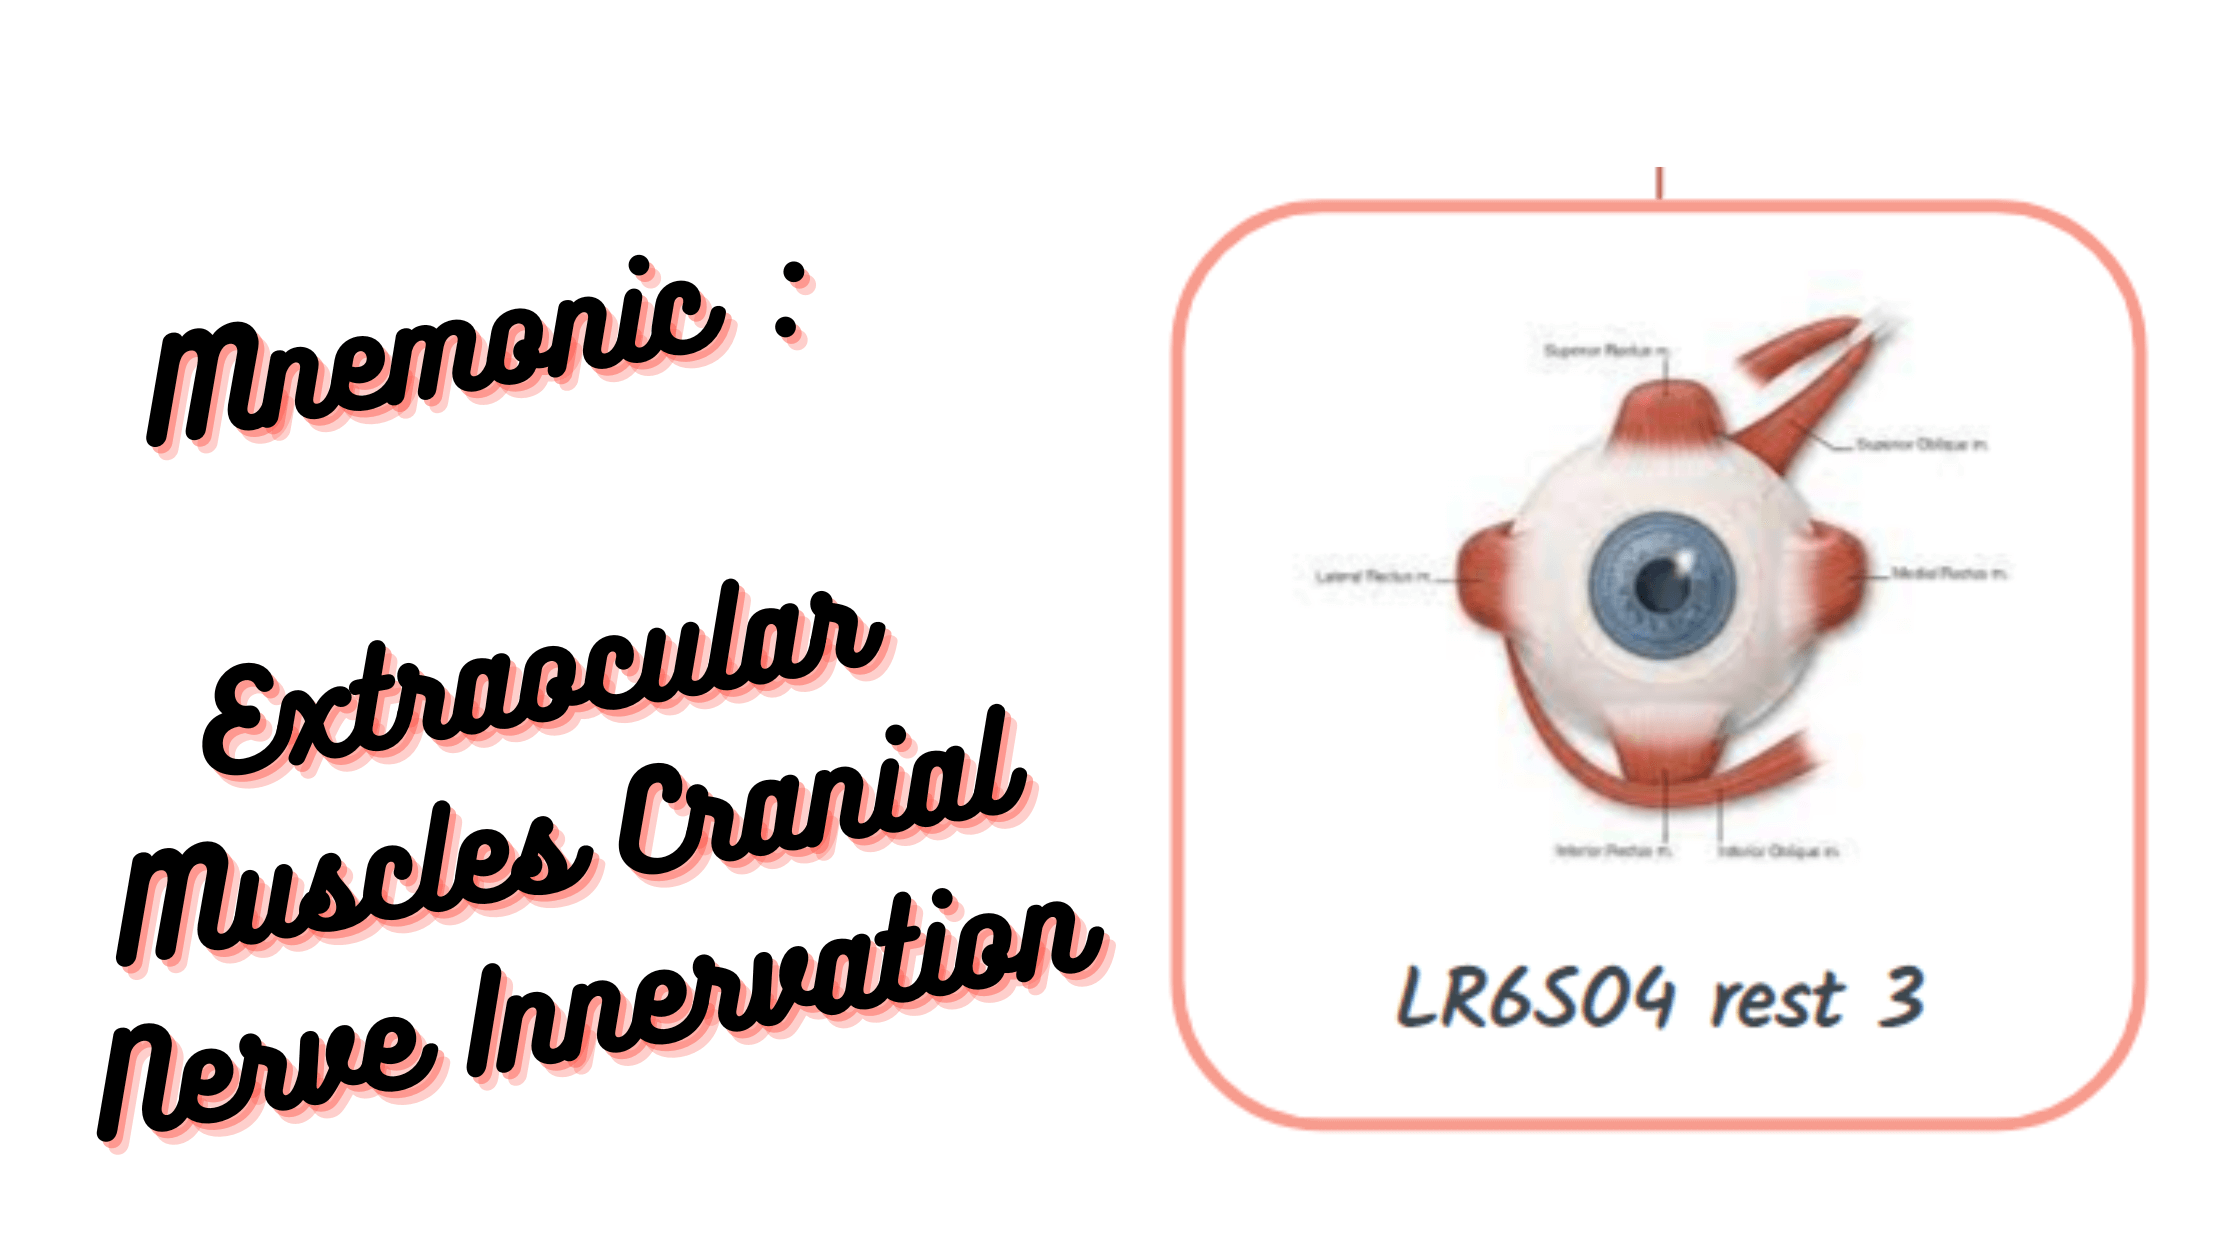 Mnemonic _ Extraocular Muscles Cranial Nerve Innervation FOR medical exams & medical students